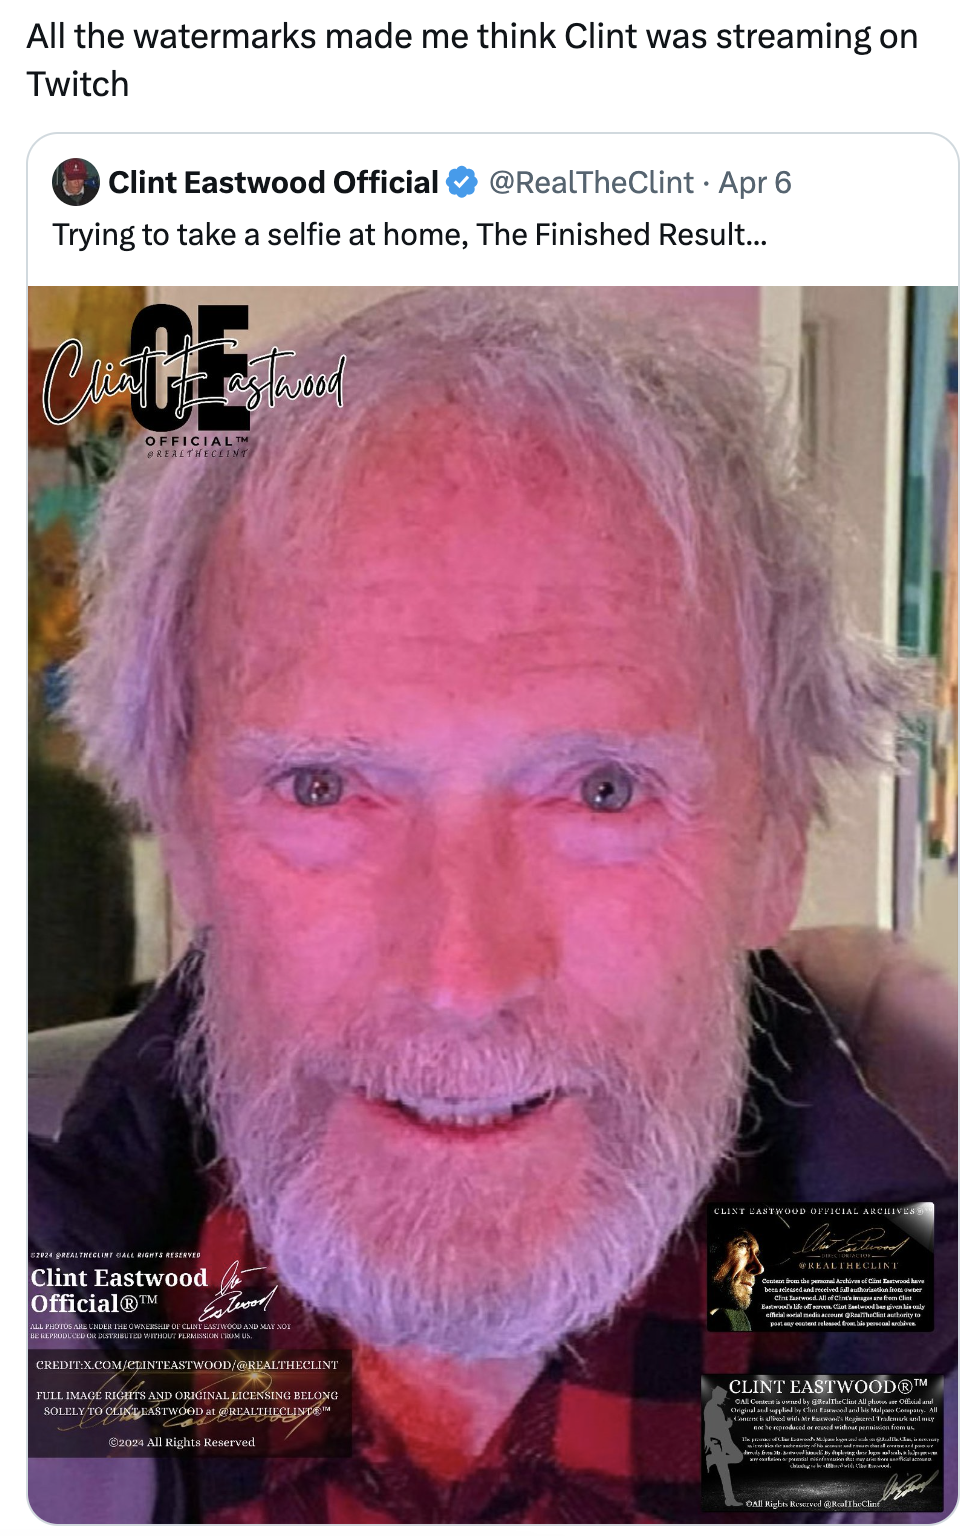 photo caption - All the watermarks made me think Clint was streaming on Twitch Clint Eastwood Official Apr 6 Trying to take a selfie at home, The Finished Result... Officialy Clint Eastwood Official Clint EARTHodbe